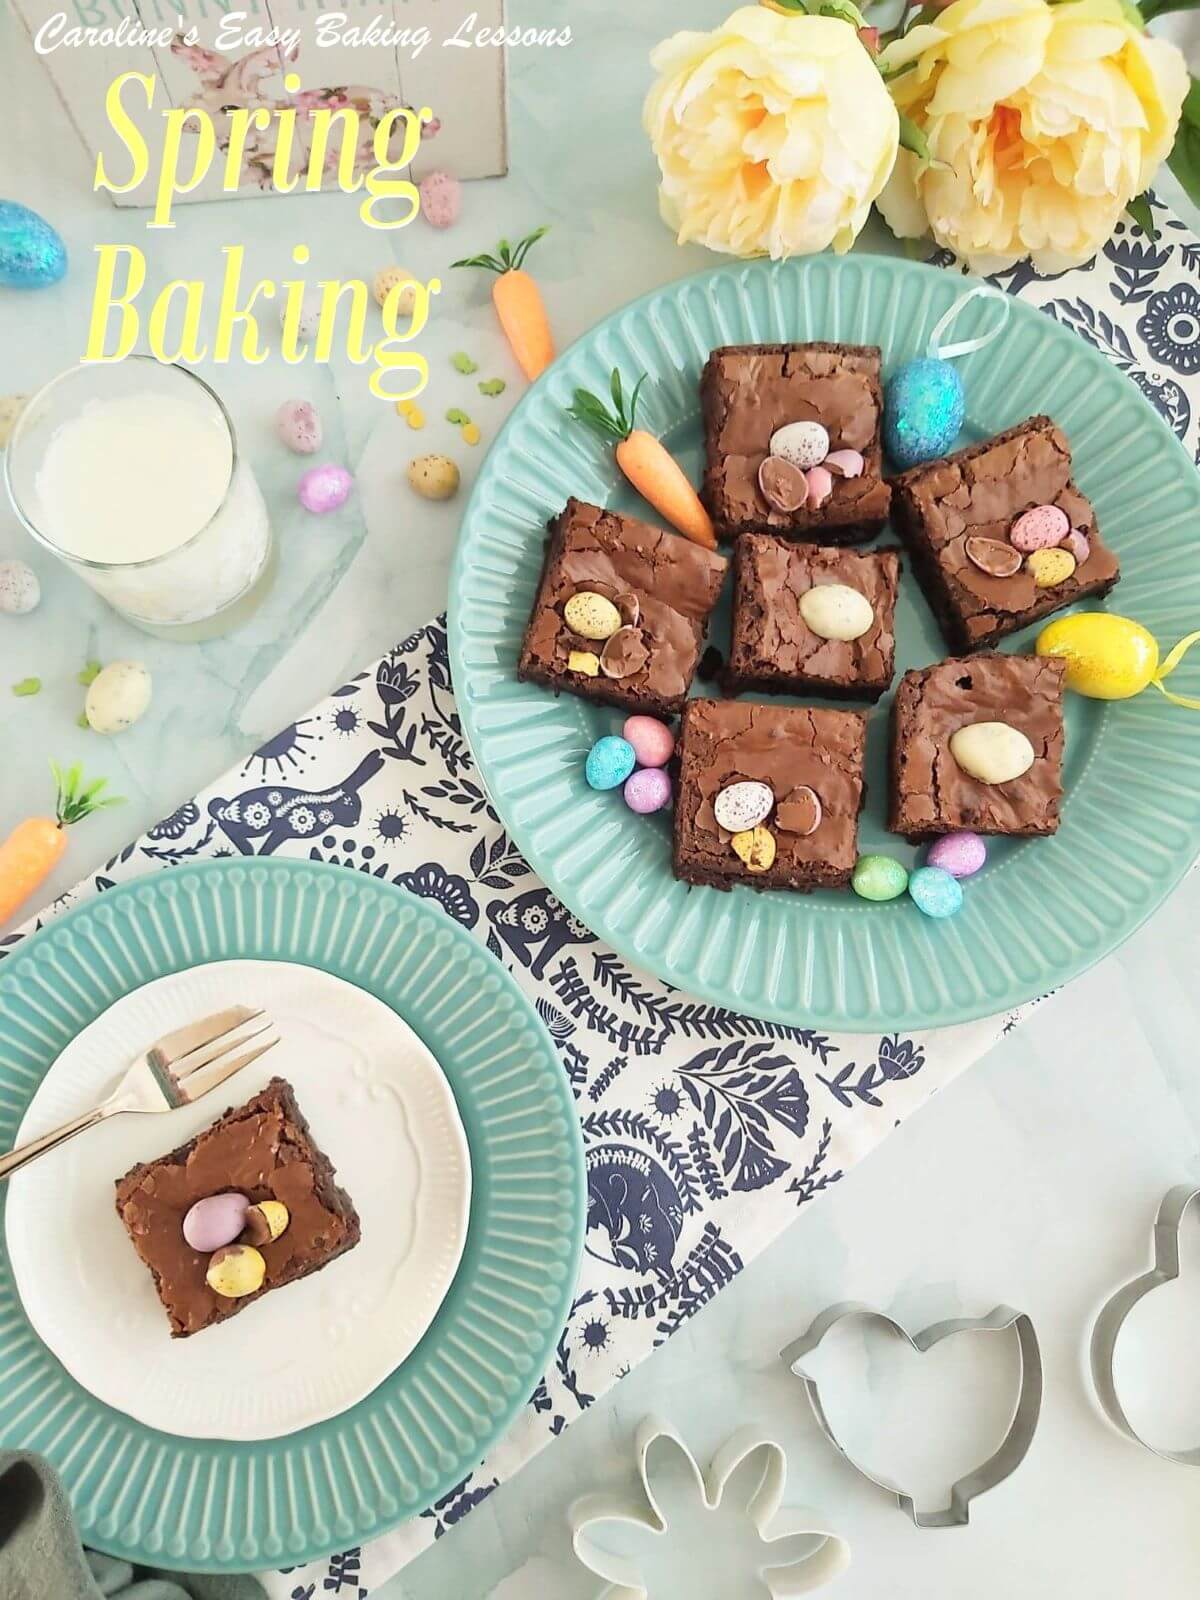 Overhead shot of mini egg topped brownies on a blue plate, on a SPring themed table, with one slice served & titled Spring Baking.